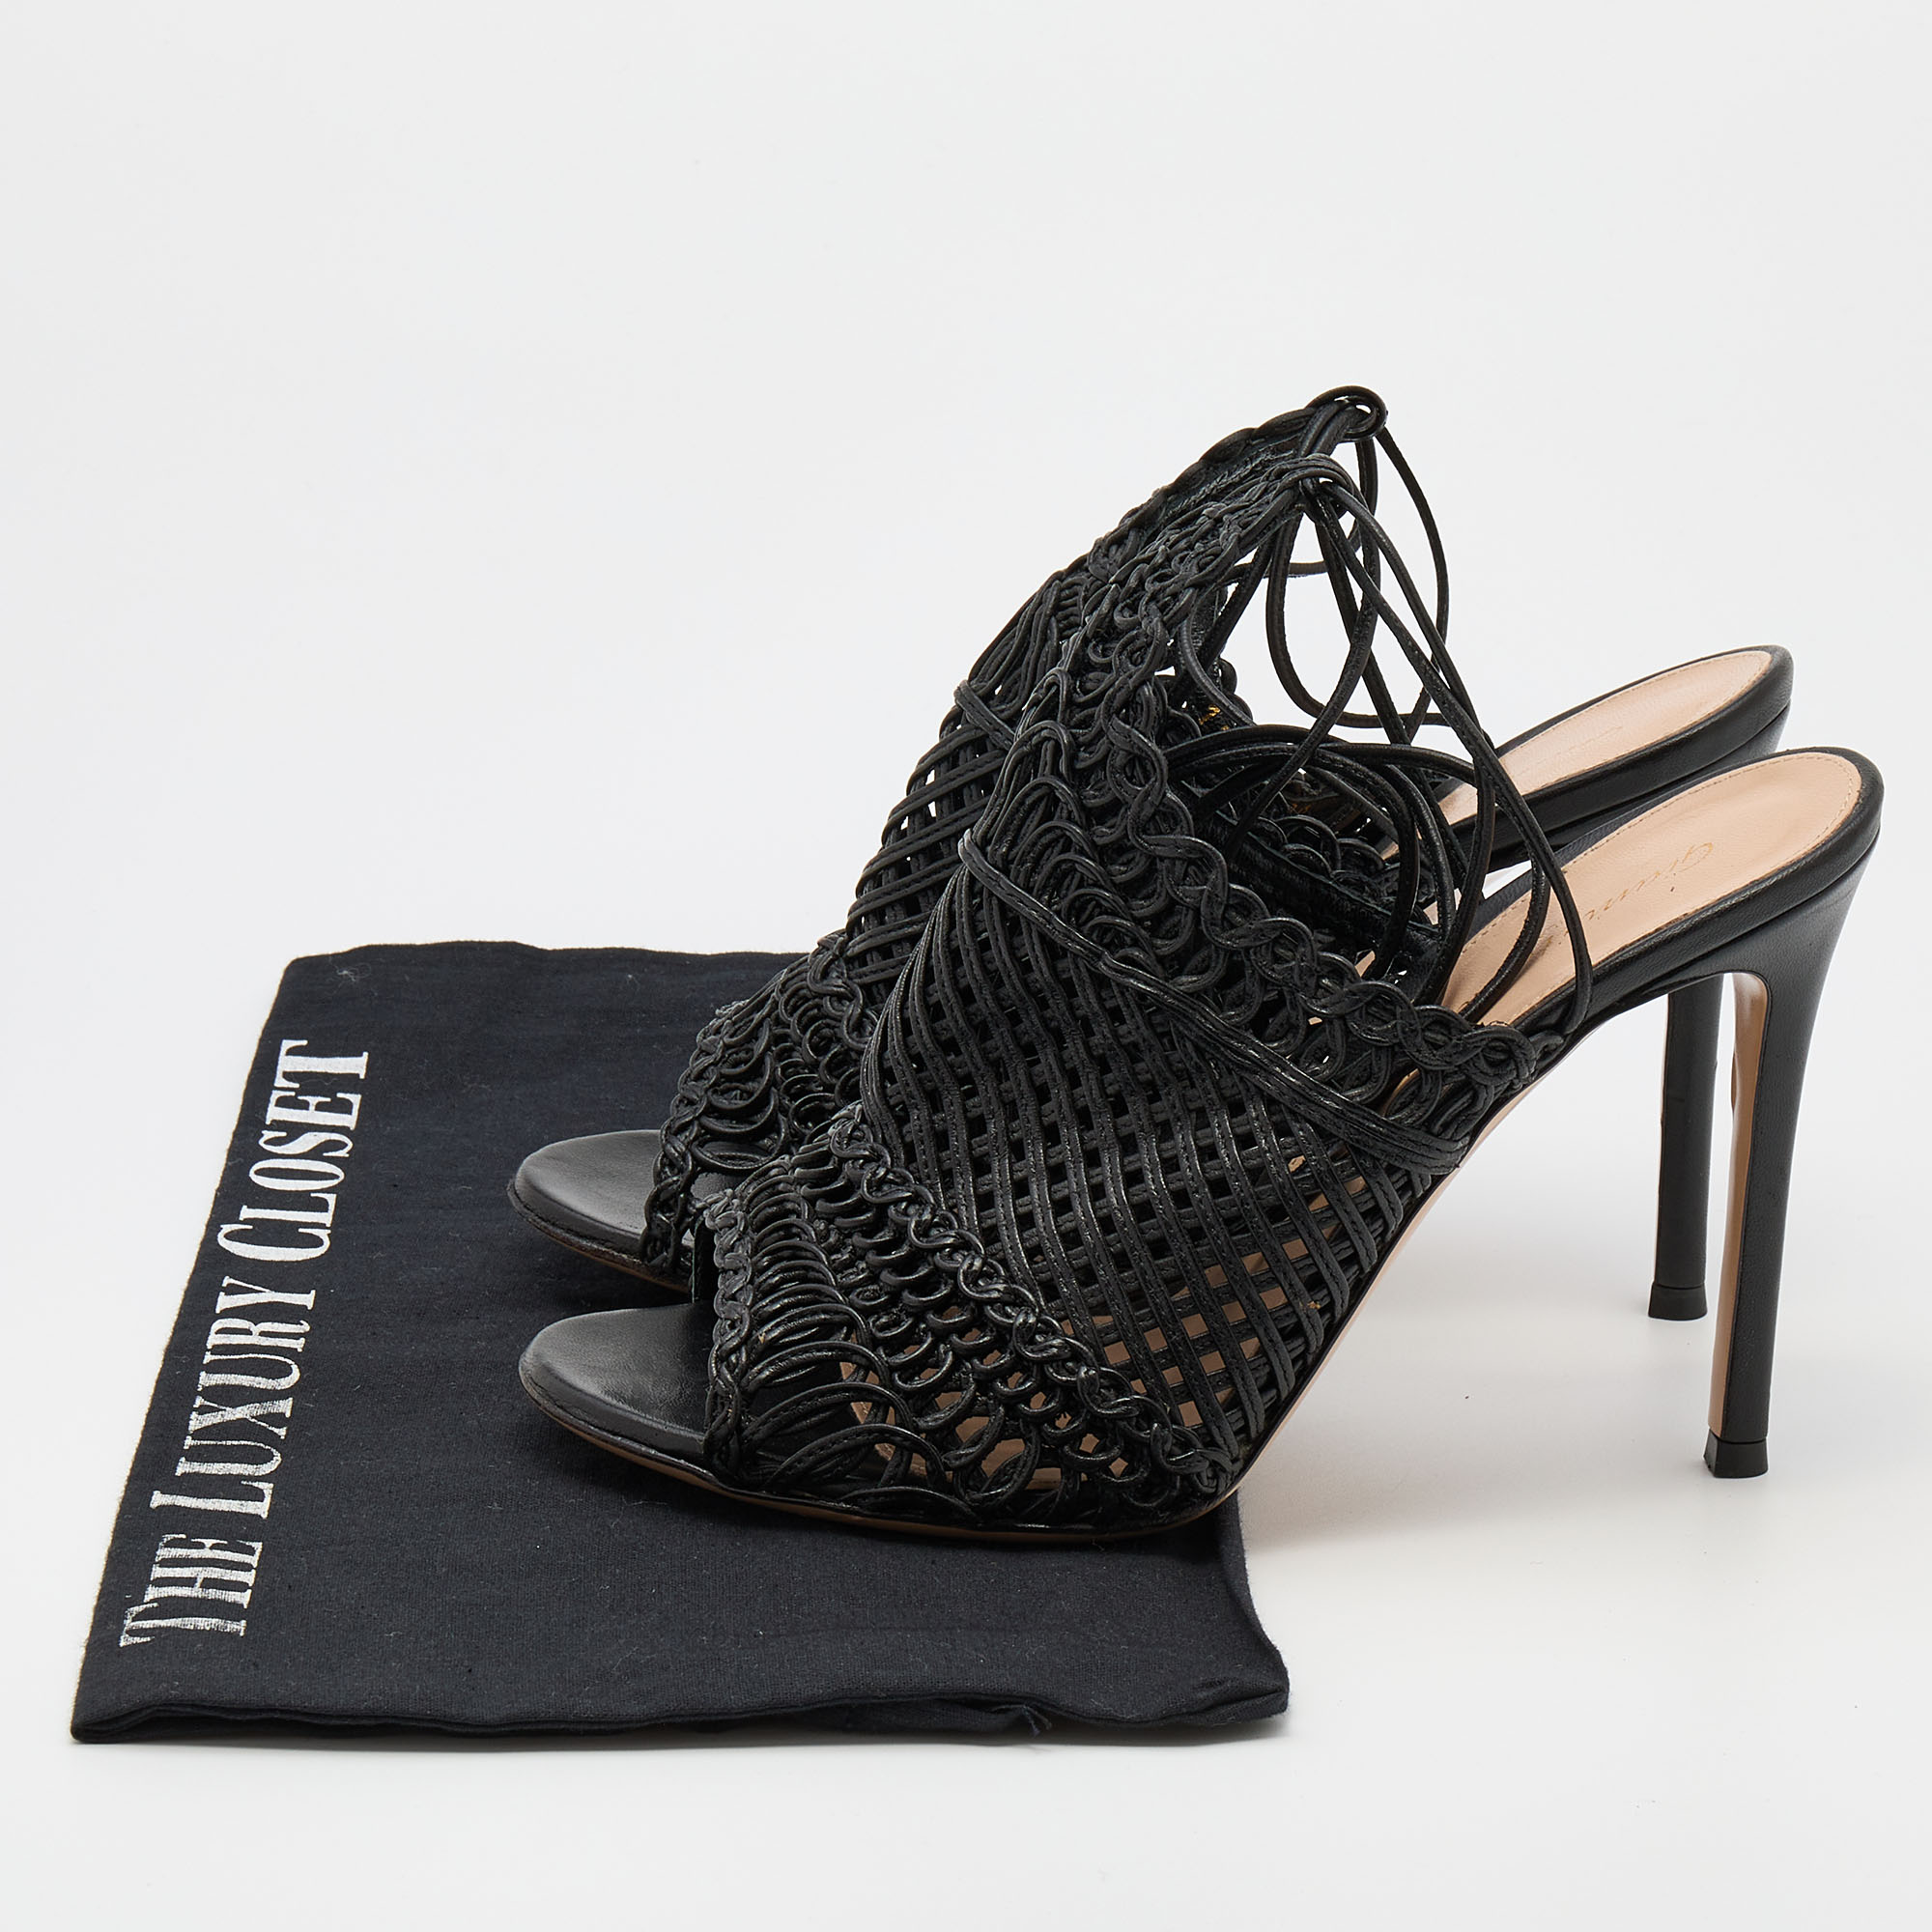 Gianvito Rossi Black Woven Leather Ankle Tie Sandals Size 38